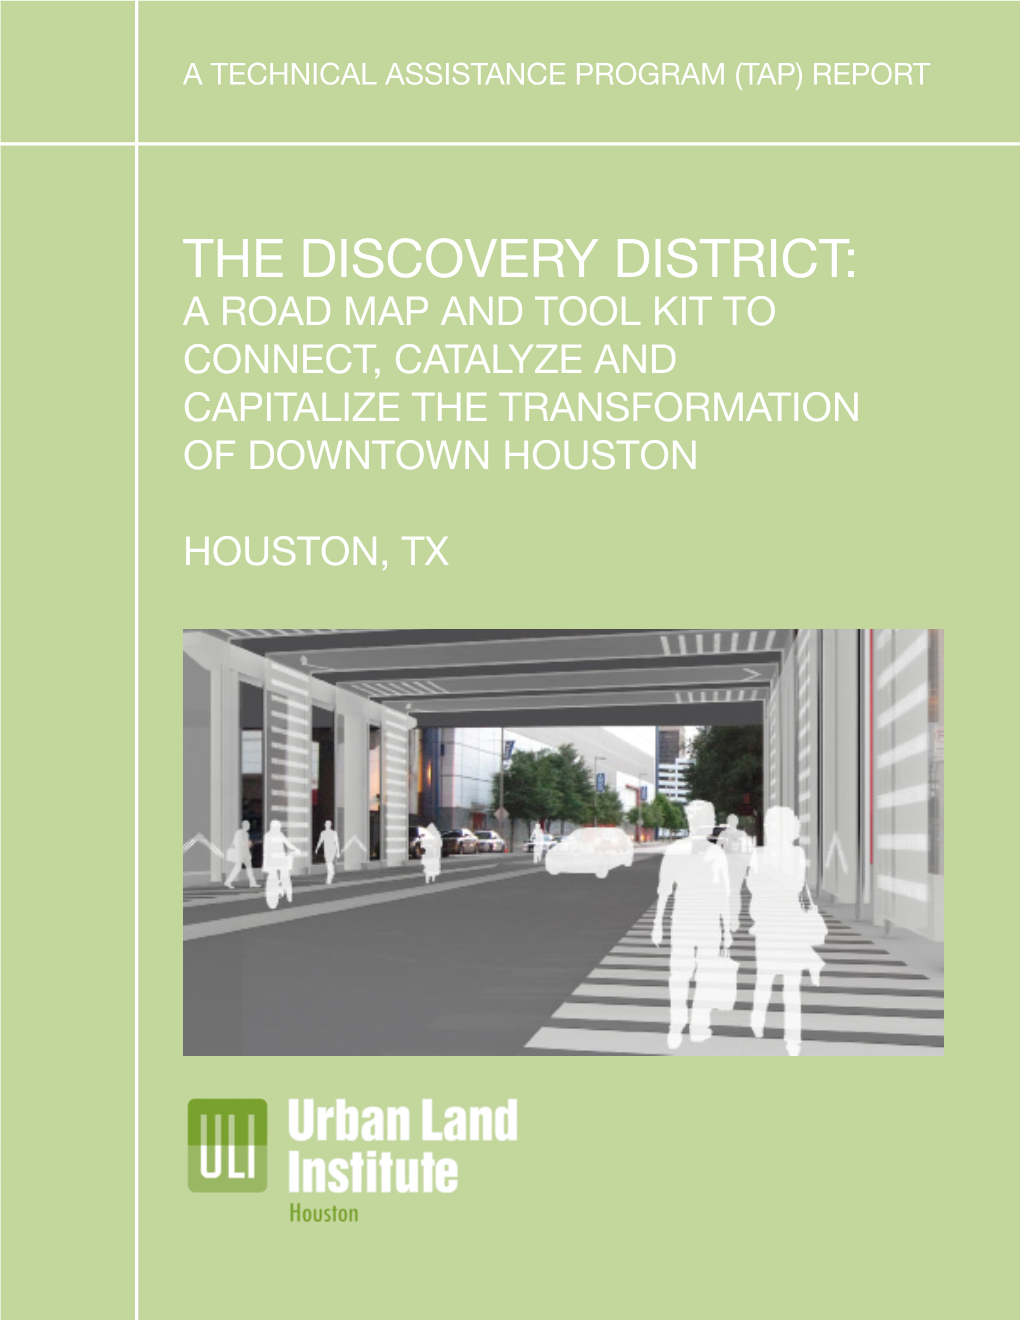 The Discovery District: a Road Map and Tool Kit to Connect, Catalyze and Capitalize the Transformation of Downtown Houston